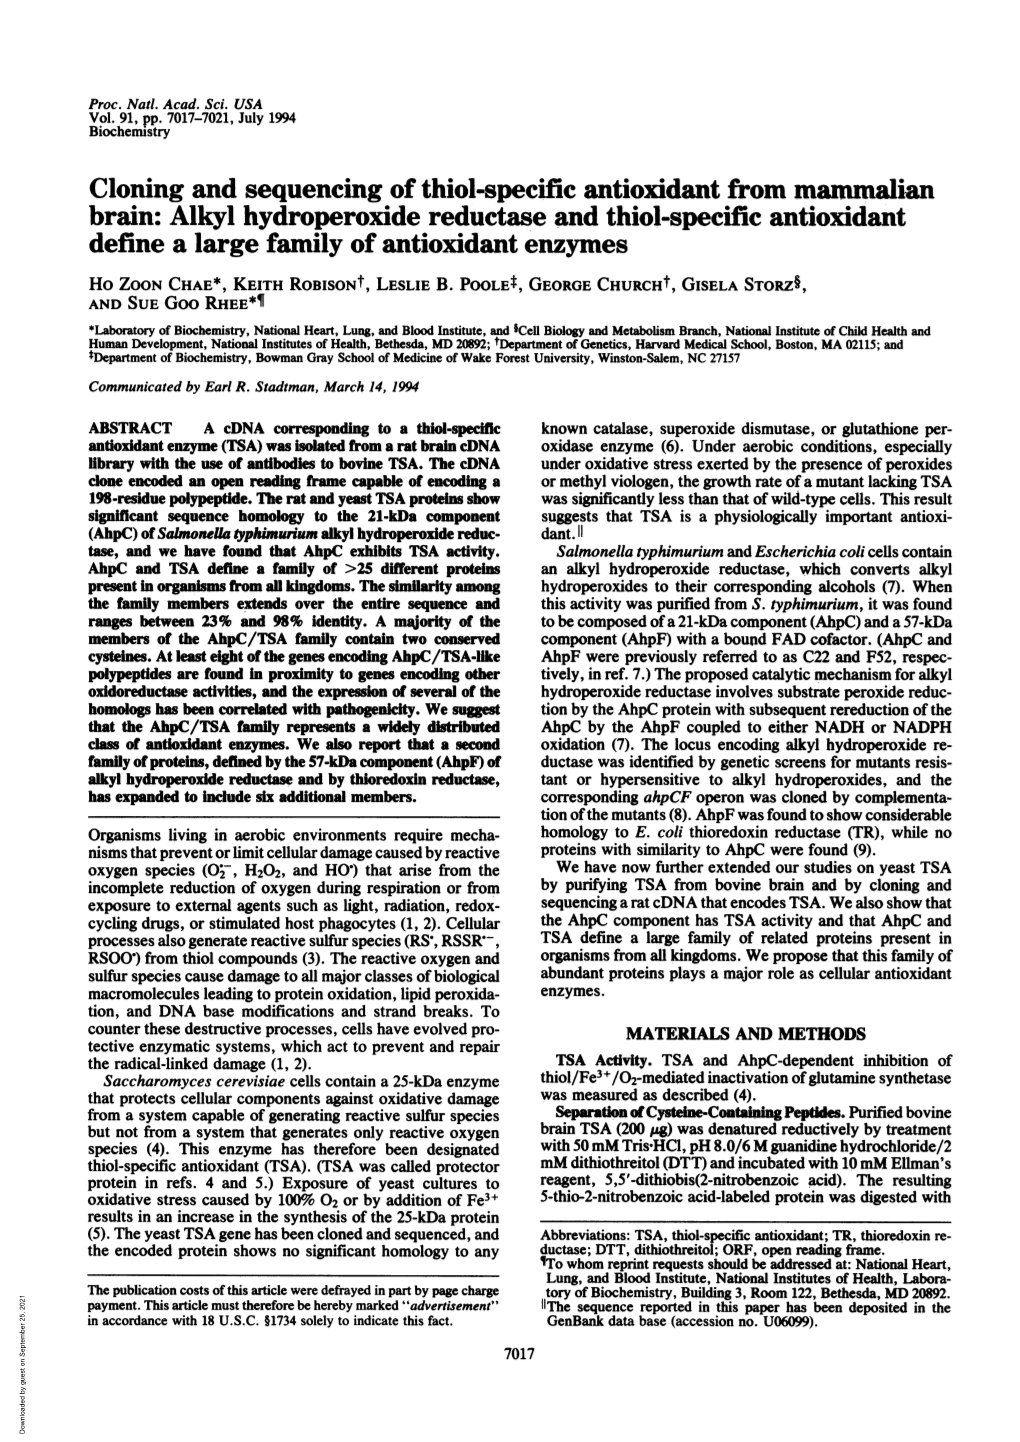 Alkyl Hydroperoxide Reductase and Thiol-Specific Antioxidant Define a Large Family of Antioxidant Enzymes Ho ZOON CHAE*, KEITH Robisont, LESLIE B